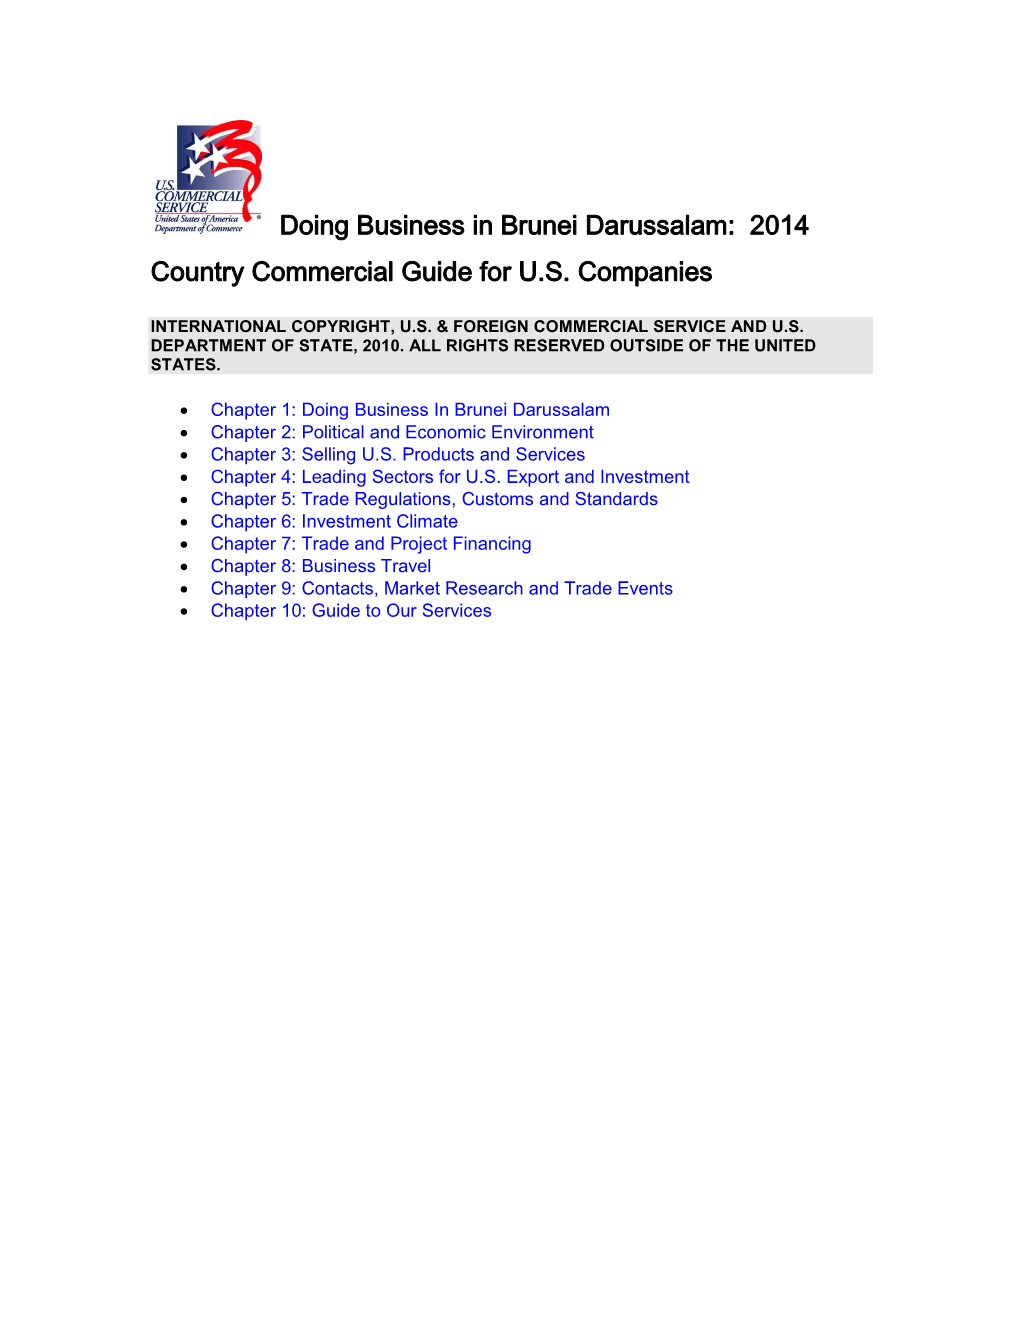 Doing Business in Brunei Darussalam: 2014 Country Commercial Guide for U.S